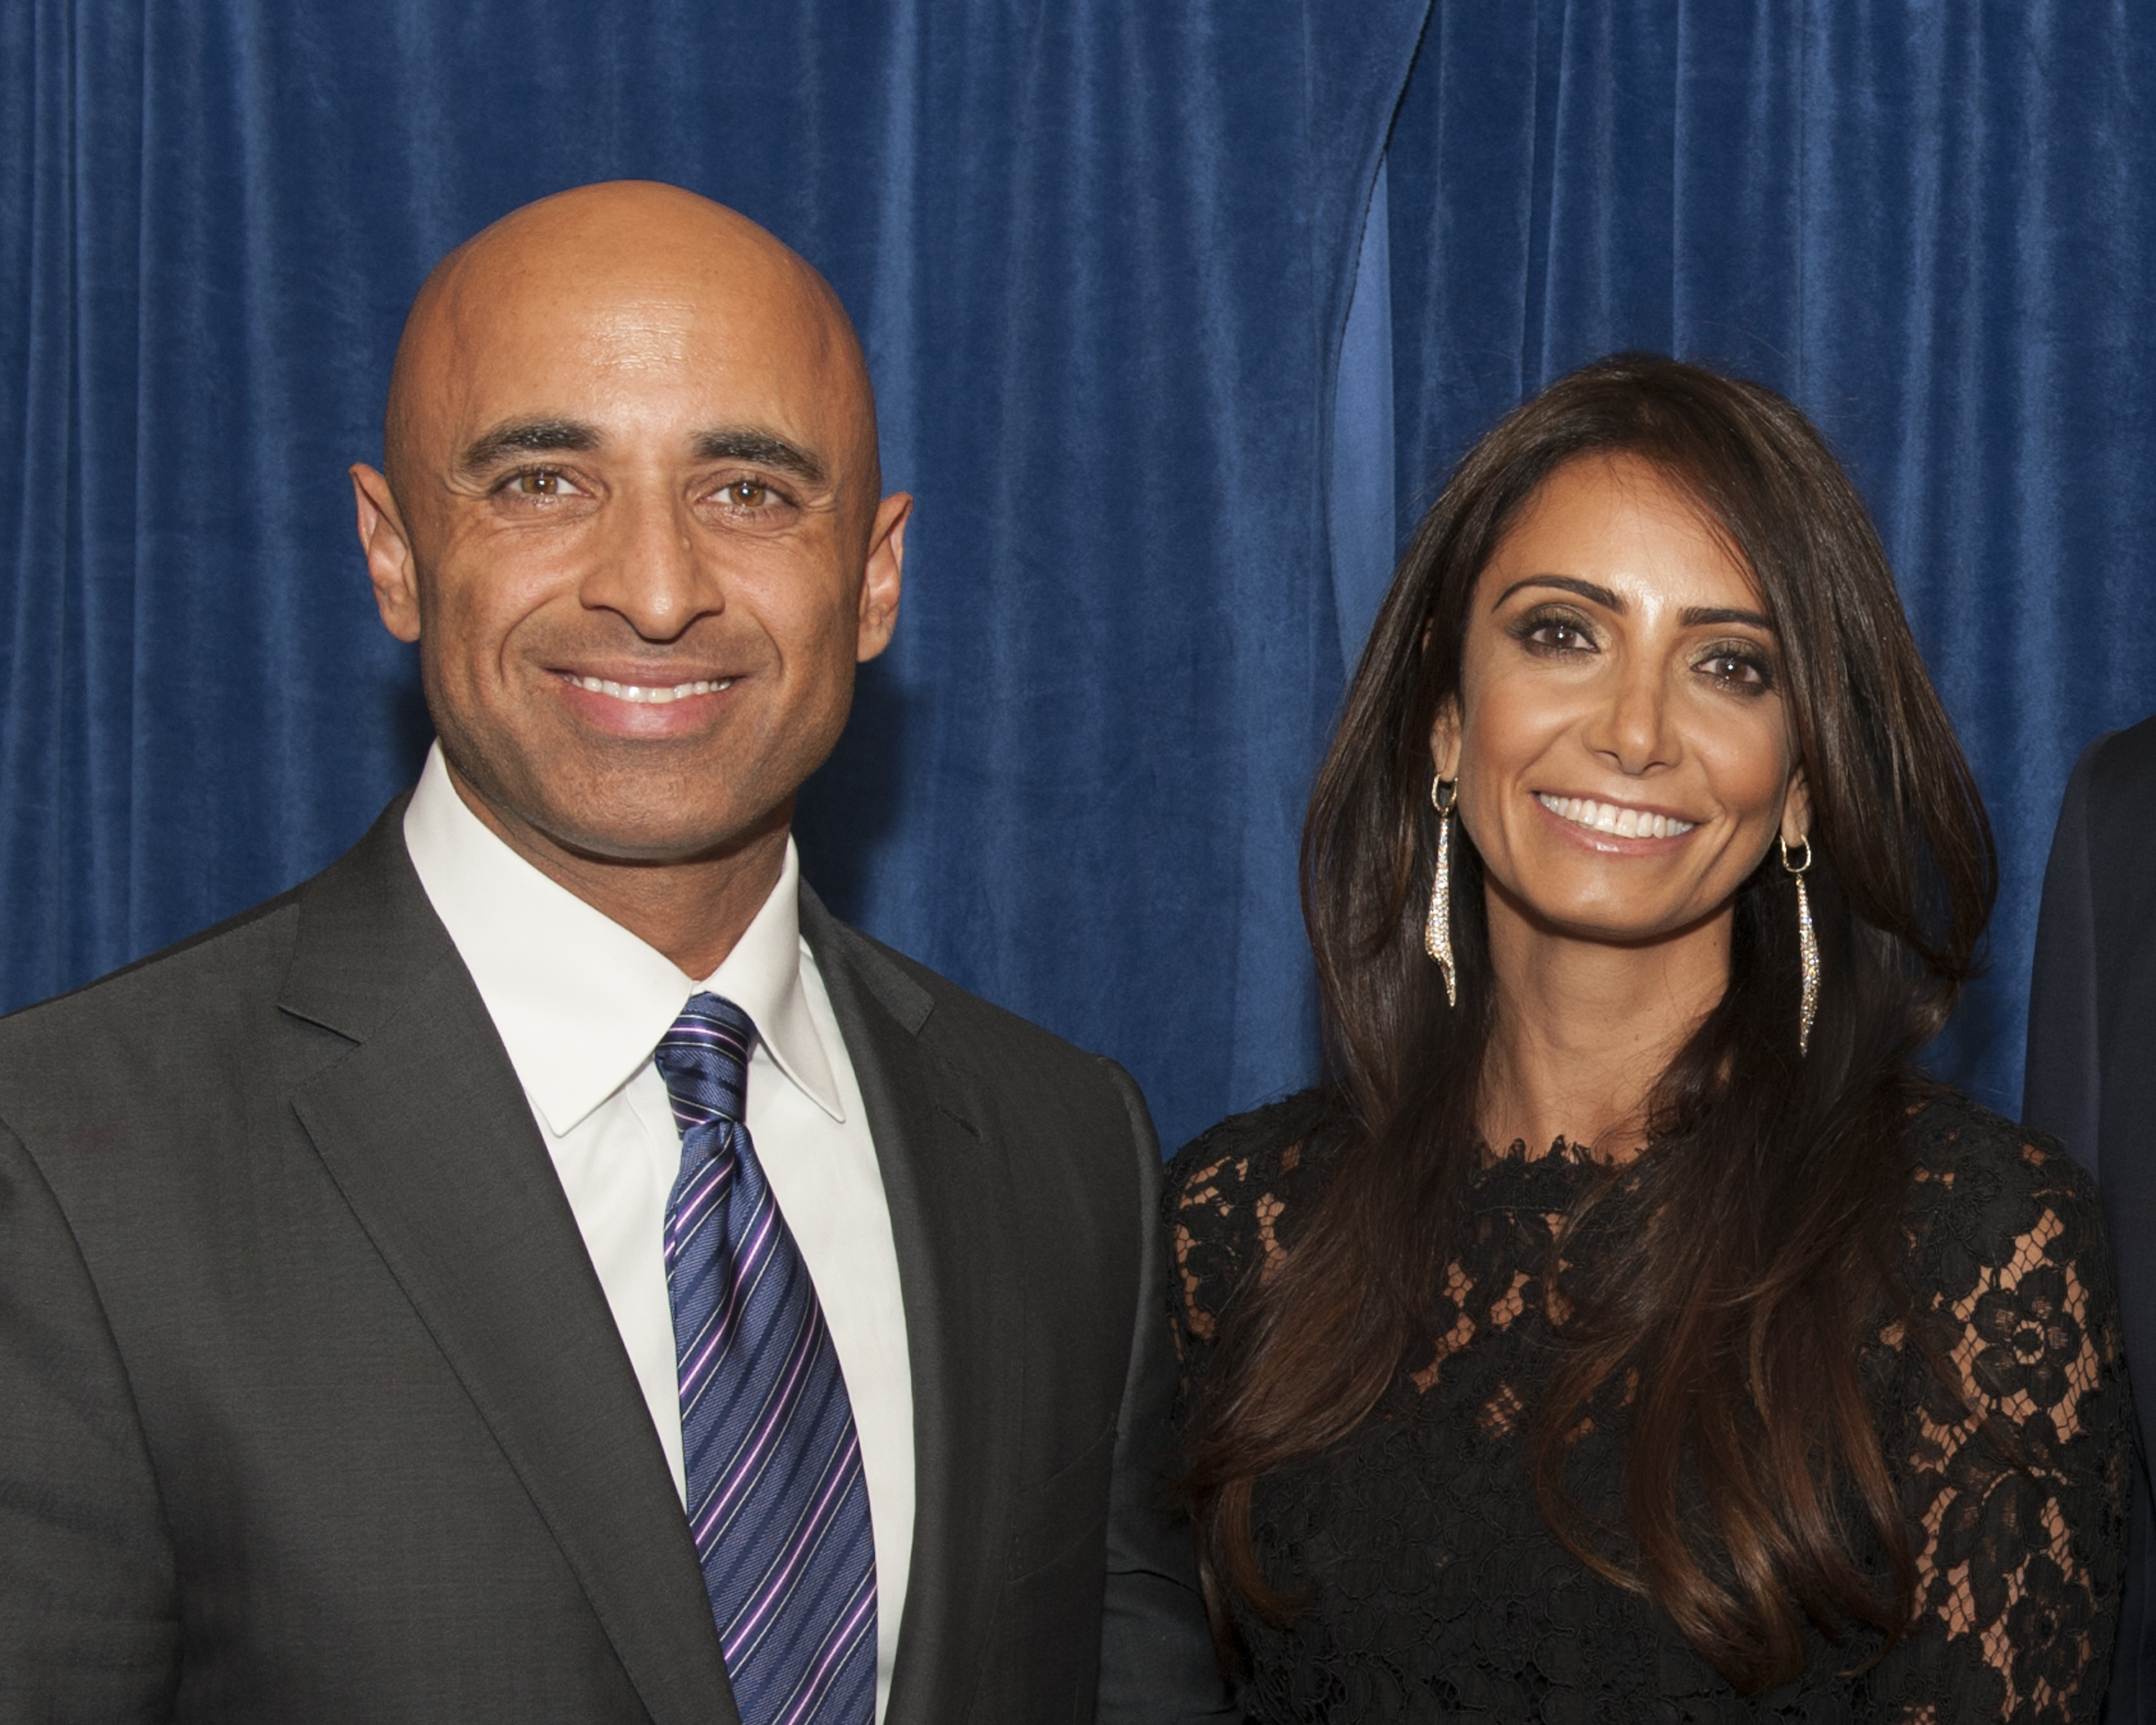 His Excellency Yousef Al Otaiba, UAE Ambassador to the United States, and his wife, Abeer